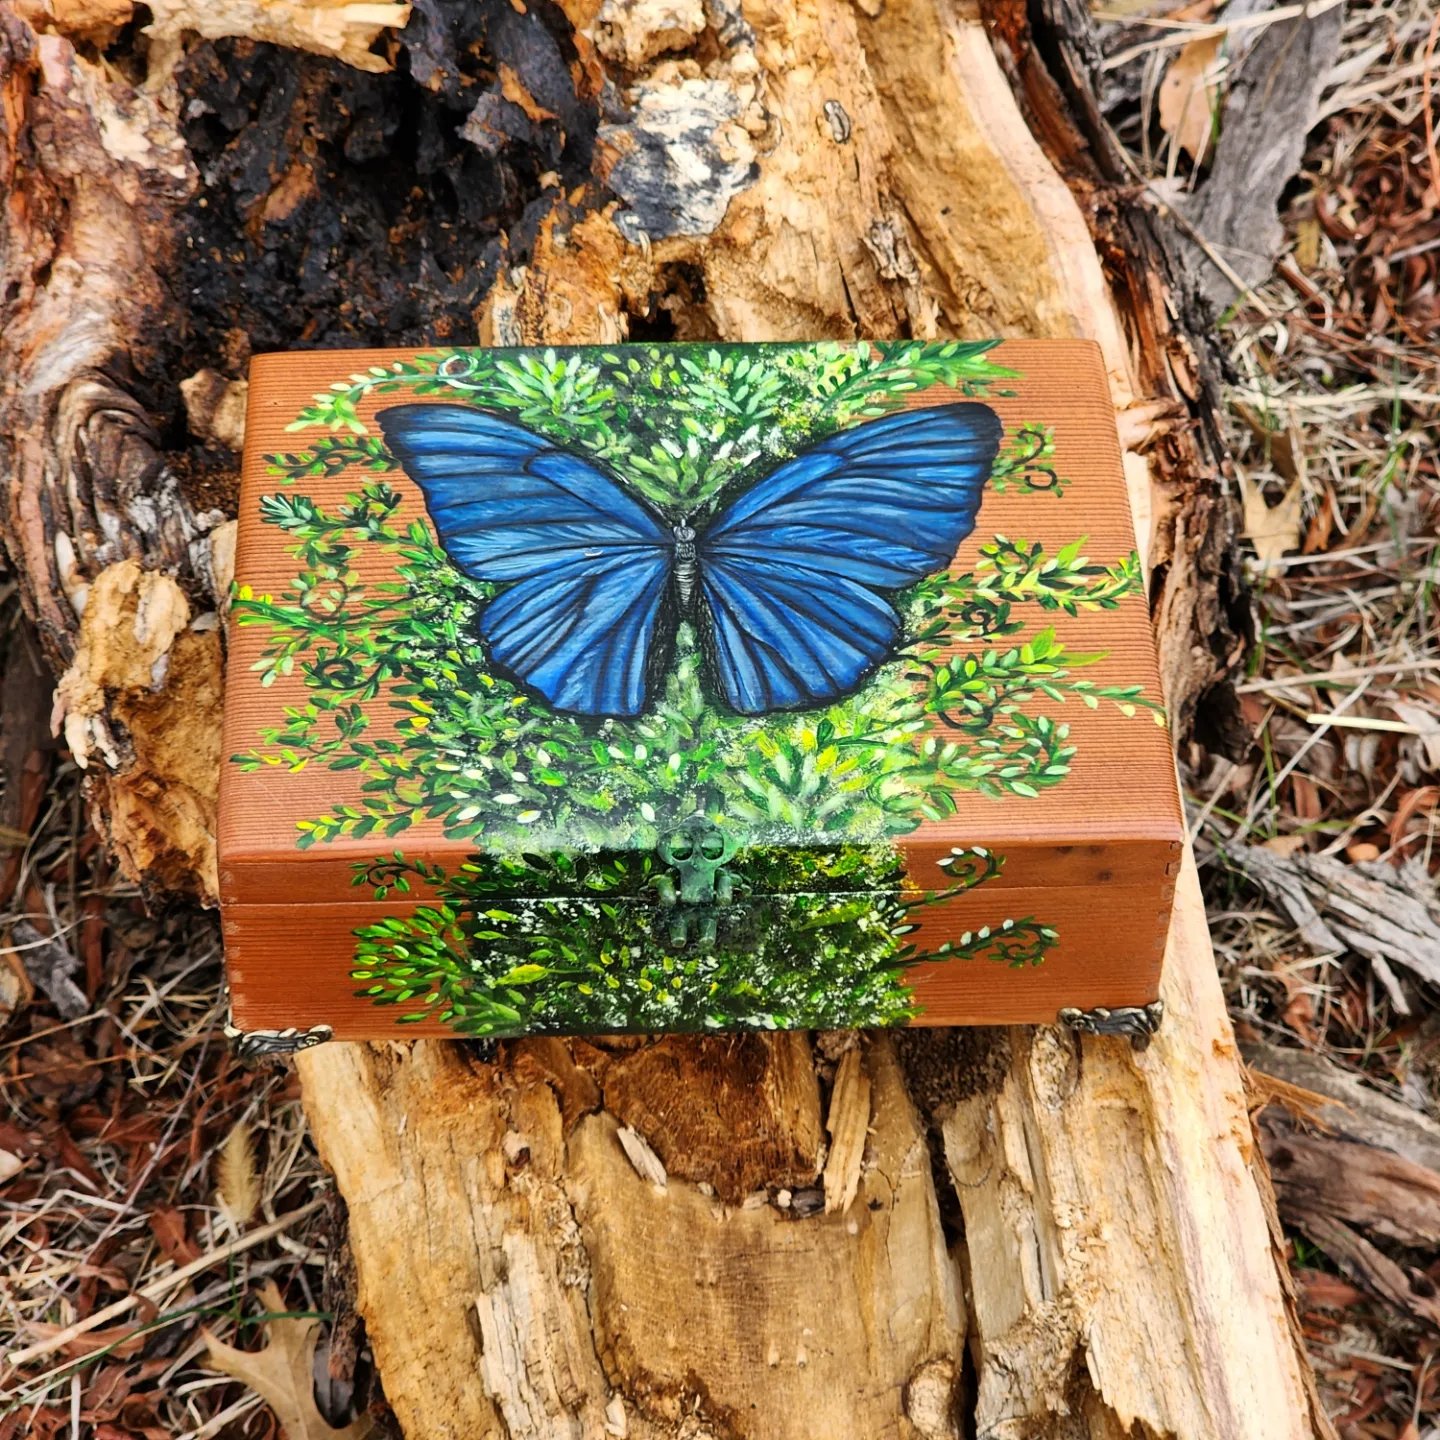 Antique wooden trinket box made of cedar wood. Handpainted with acrylic paint. Metal feet and lock. Made with love and dedication. Blue morpho butterfly sitting on top of a tree full of moss.